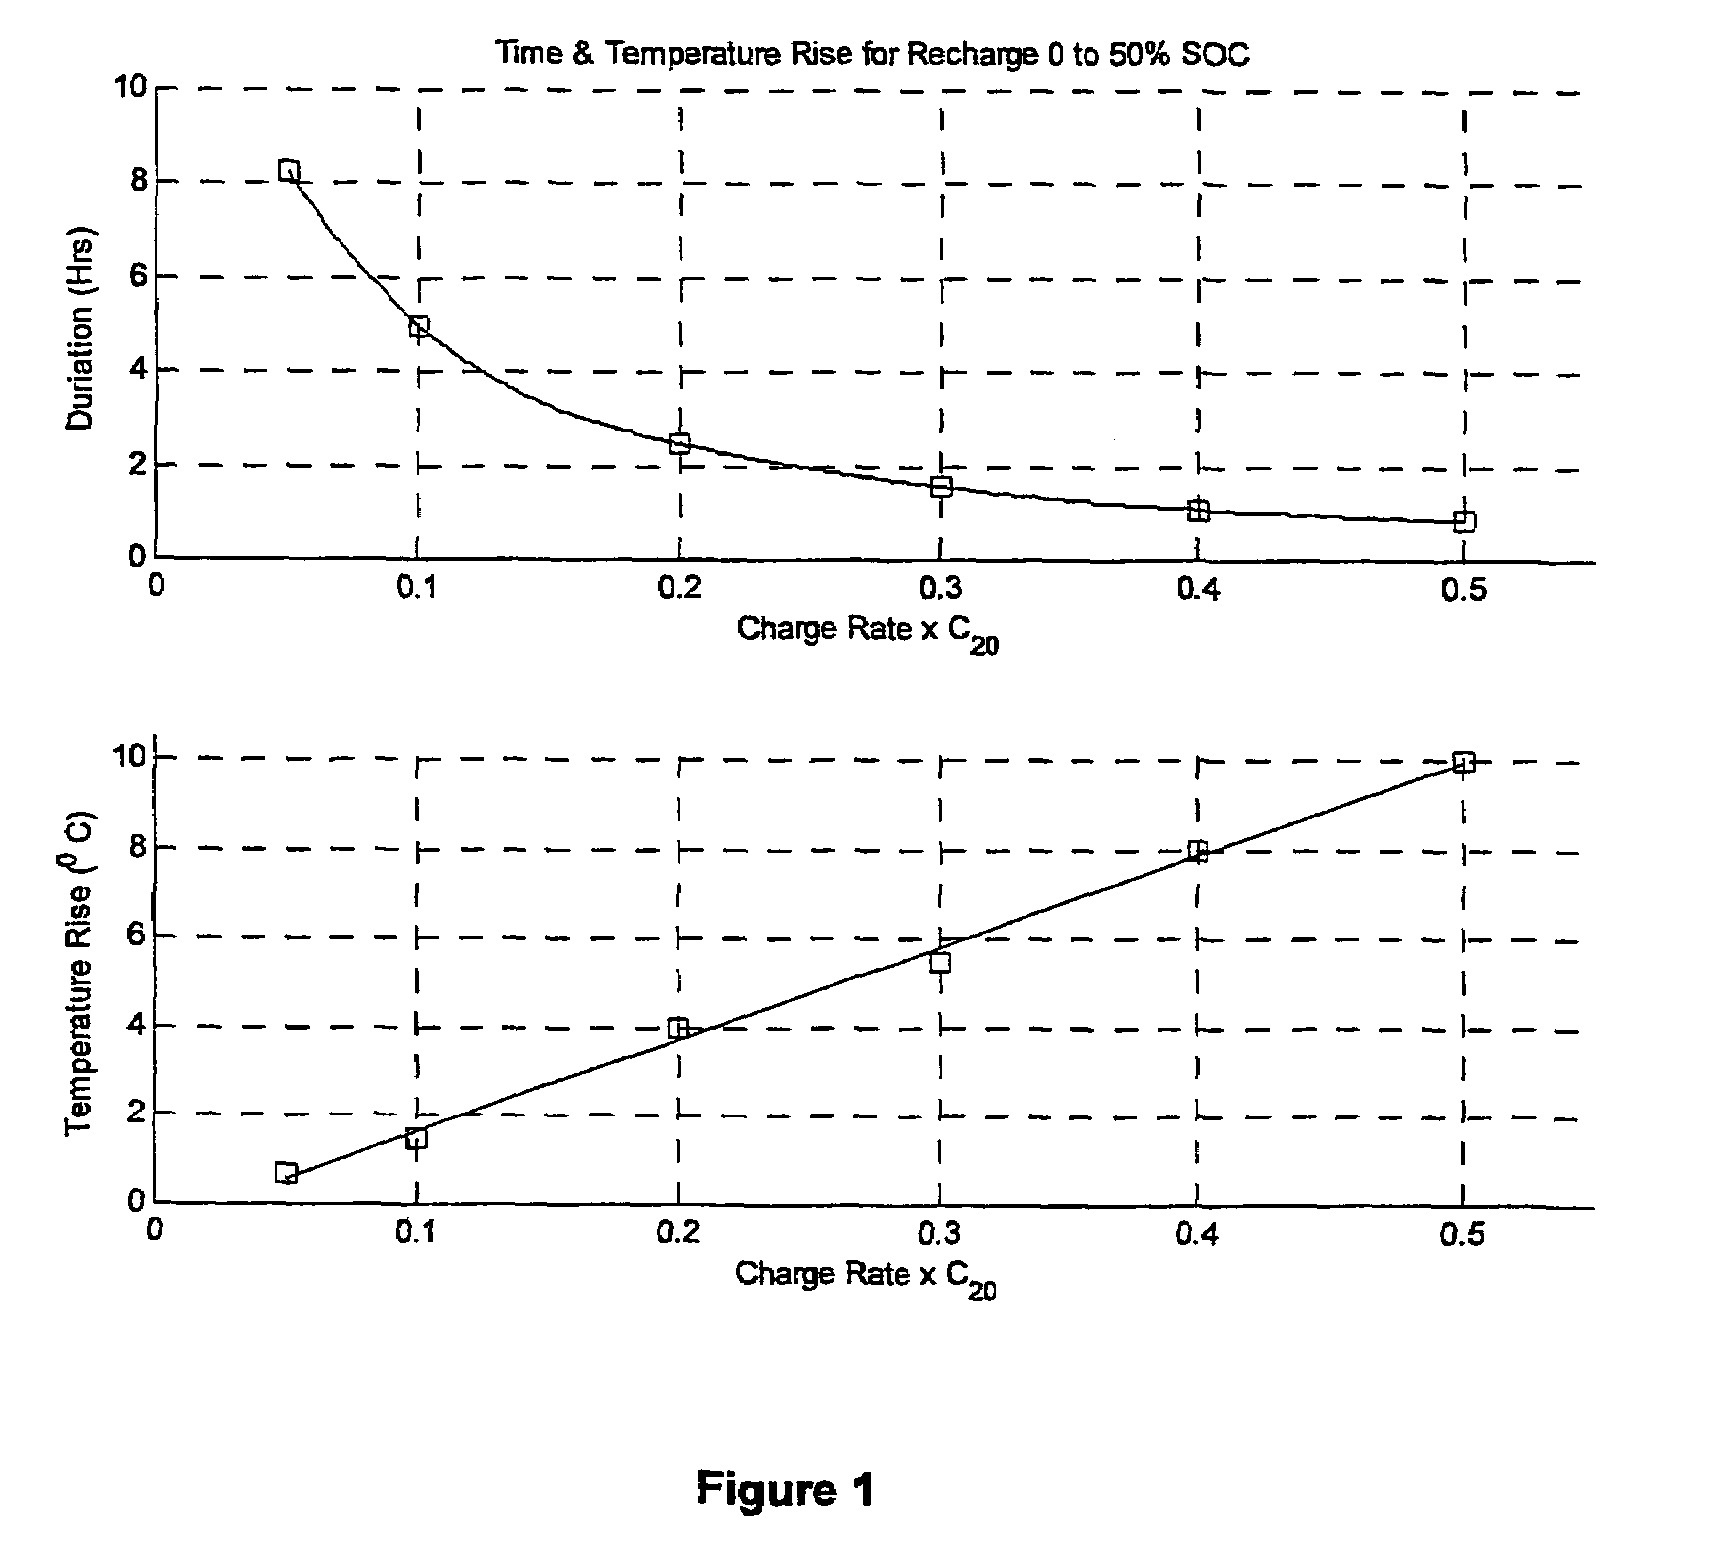 Stress management of battery recharge, and method of state of charge estimation